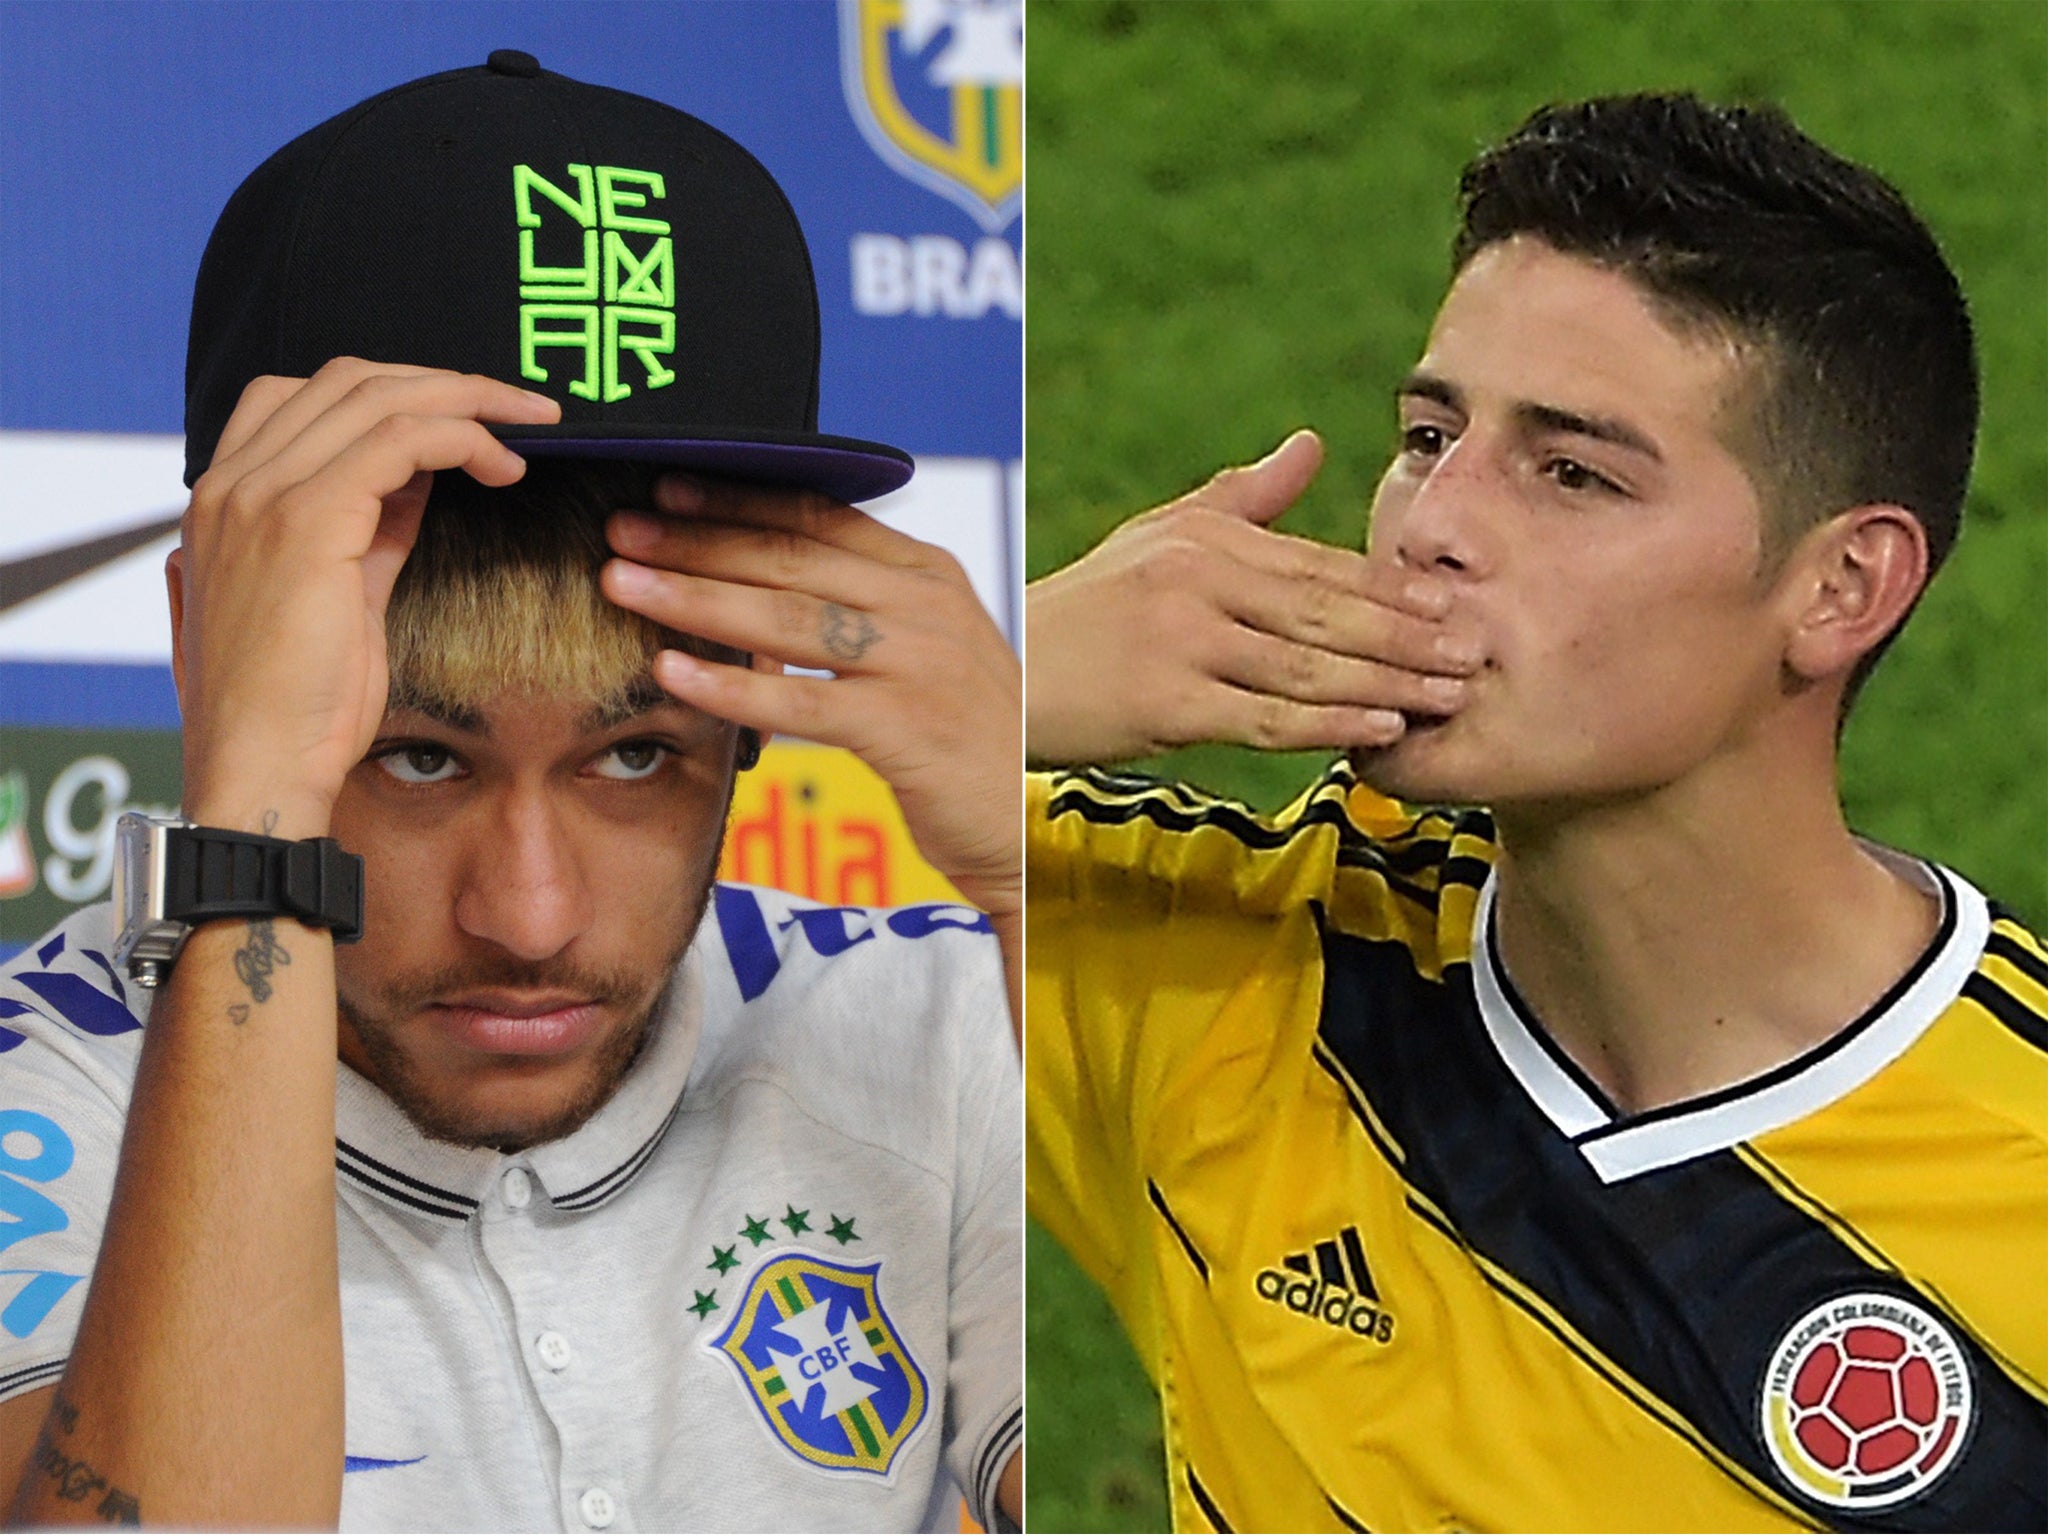 Will it all come down to Neymar (left) vs James Rodriguez?